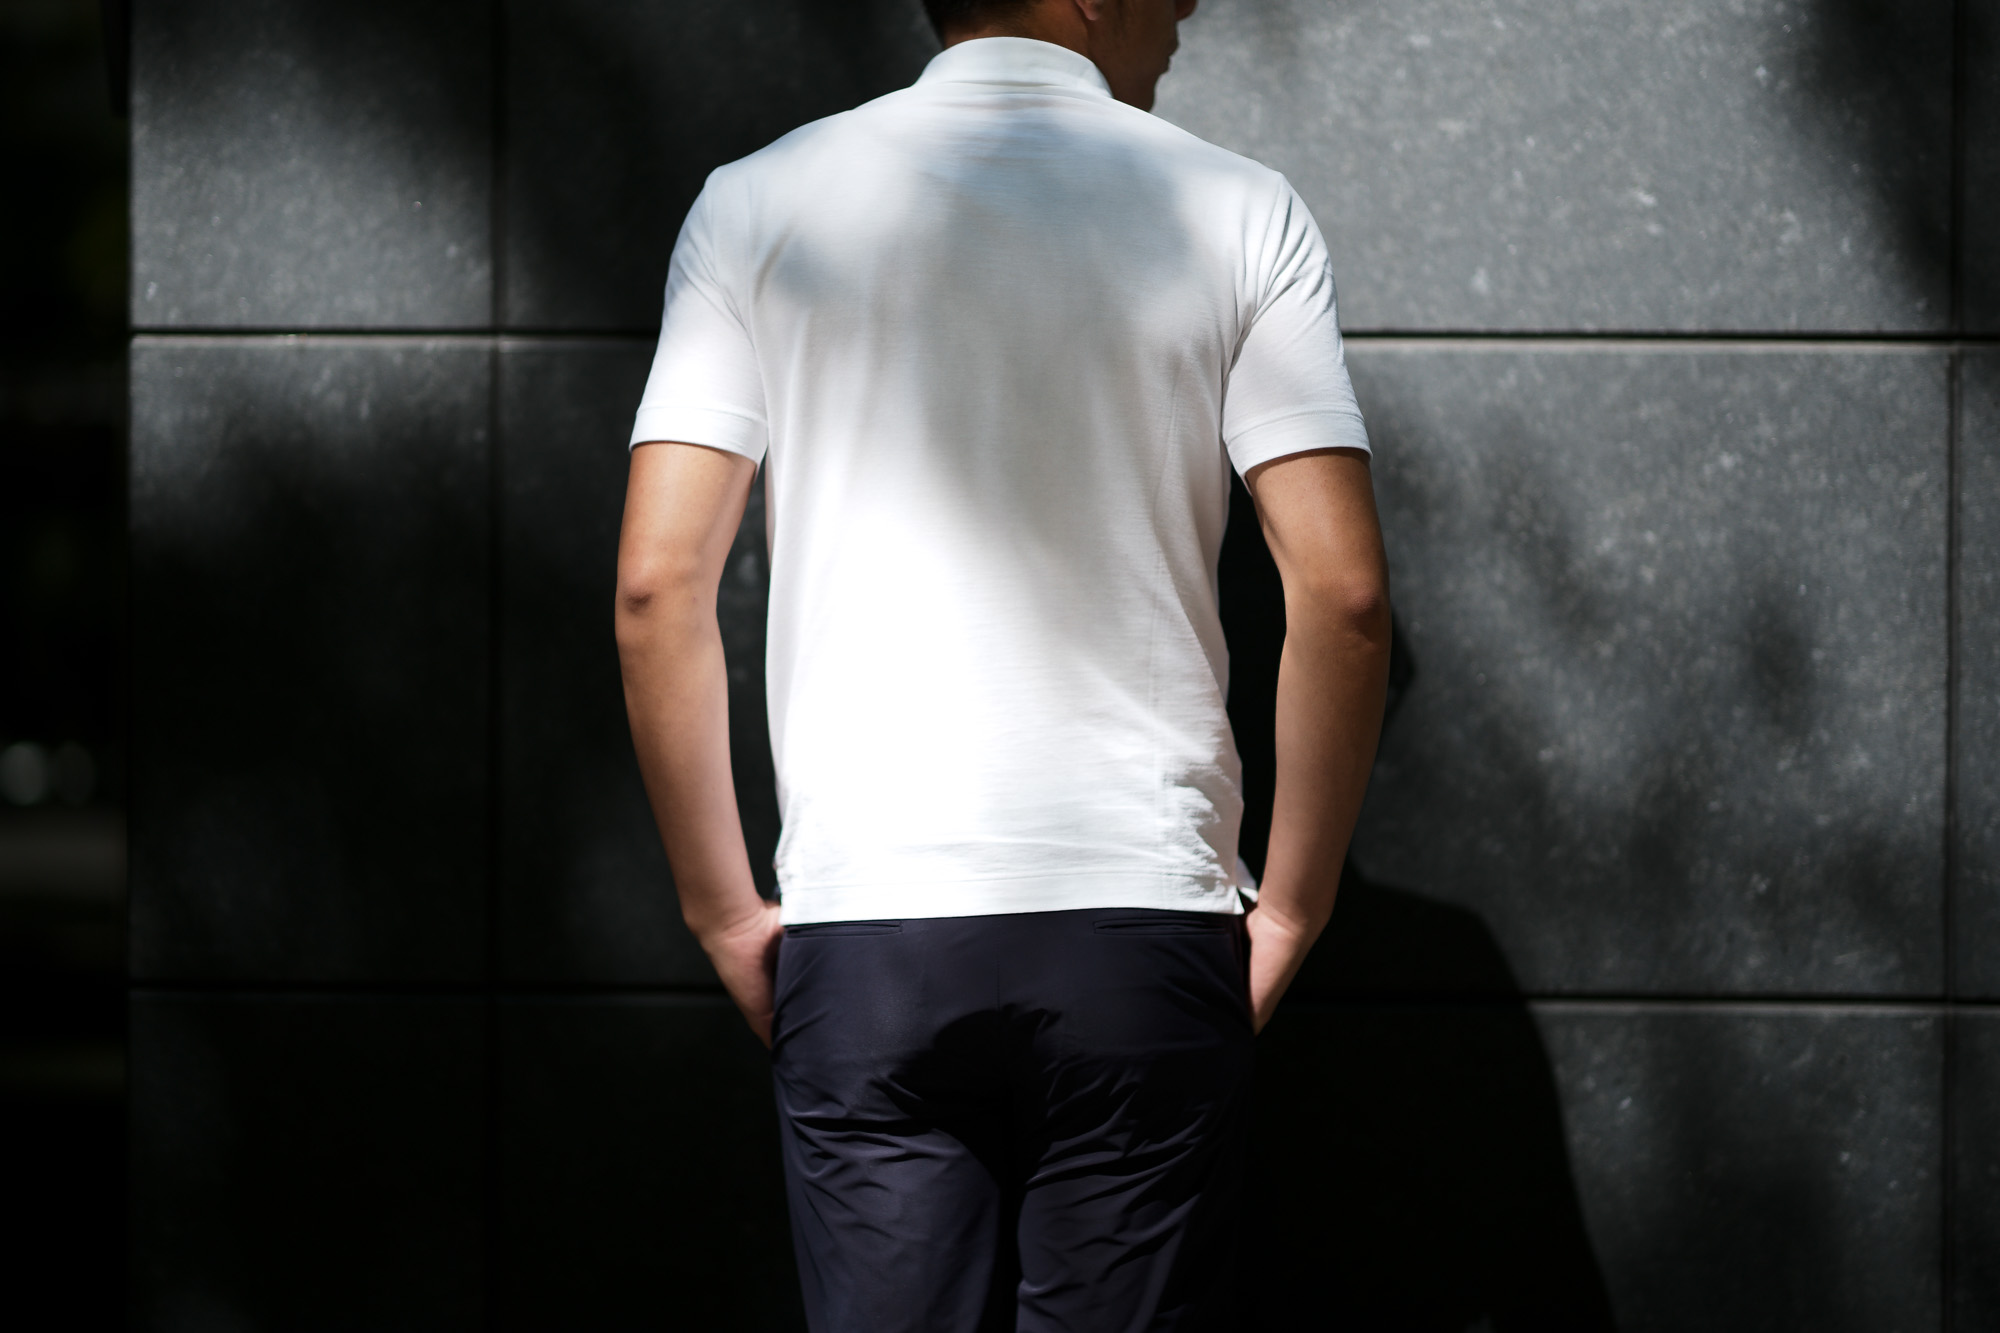 ZANONE(ザノーネ) Polo Shirt ice cotton アイスコットン ポロシャツ WHITE (ホワイト・Z0001)  made in italy (イタリア製) 2019 春夏新作 愛知 名古屋 altoediritto アルトエデリット